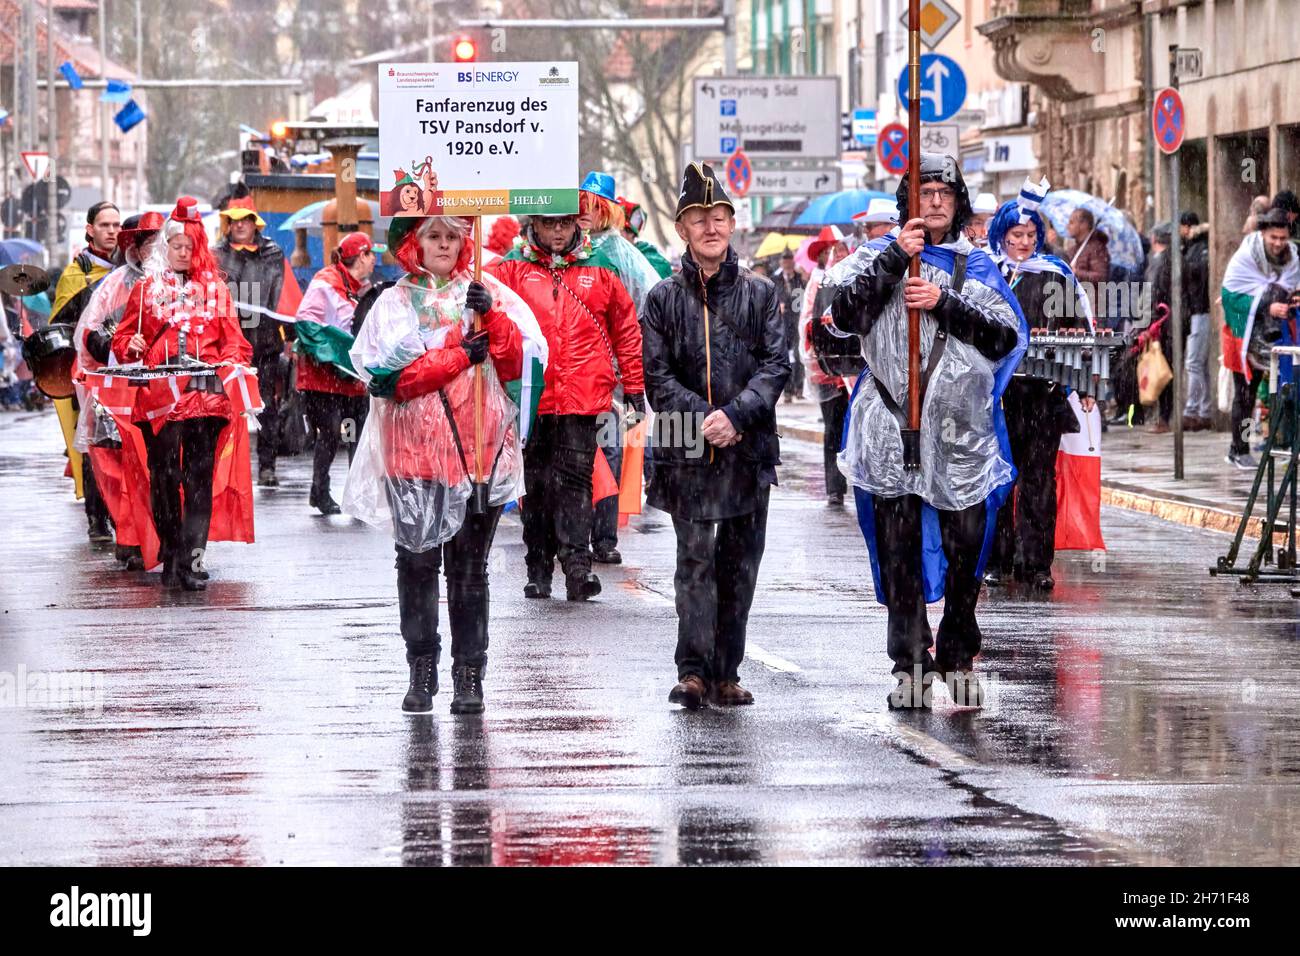 Braunschweig, Germany, February 23, 2020: Fanfare procession at the carnival parade in the downpour with transparent rainwear marches through the city Stock Photo